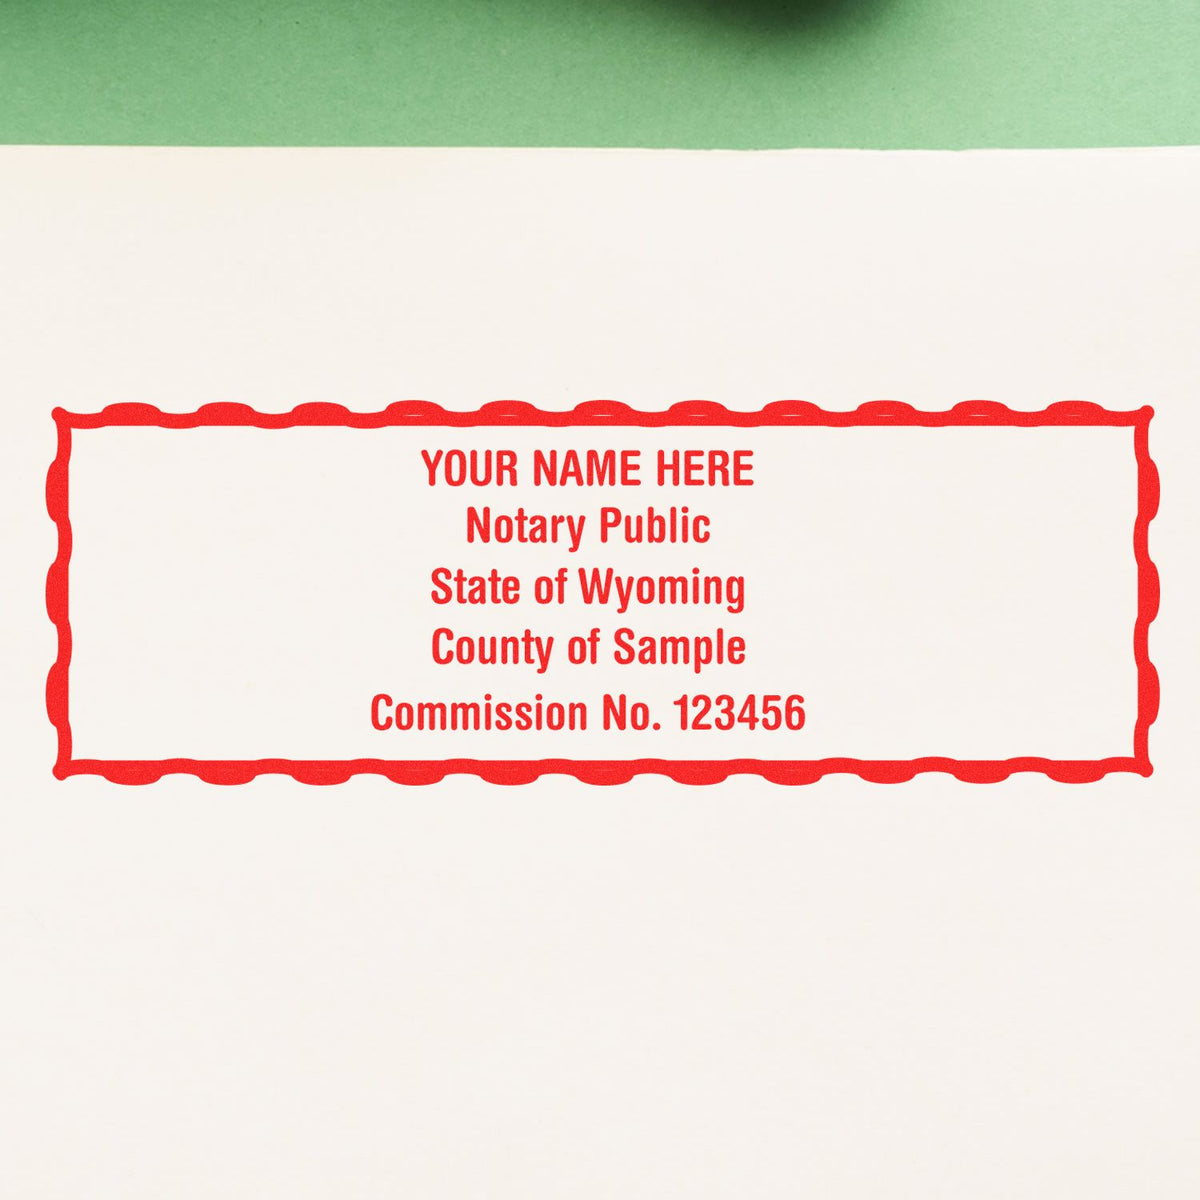 An alternative view of the MaxLight Premium Pre-Inked Wyoming Rectangular Notarial Stamp stamped on a sheet of paper showing the image in use